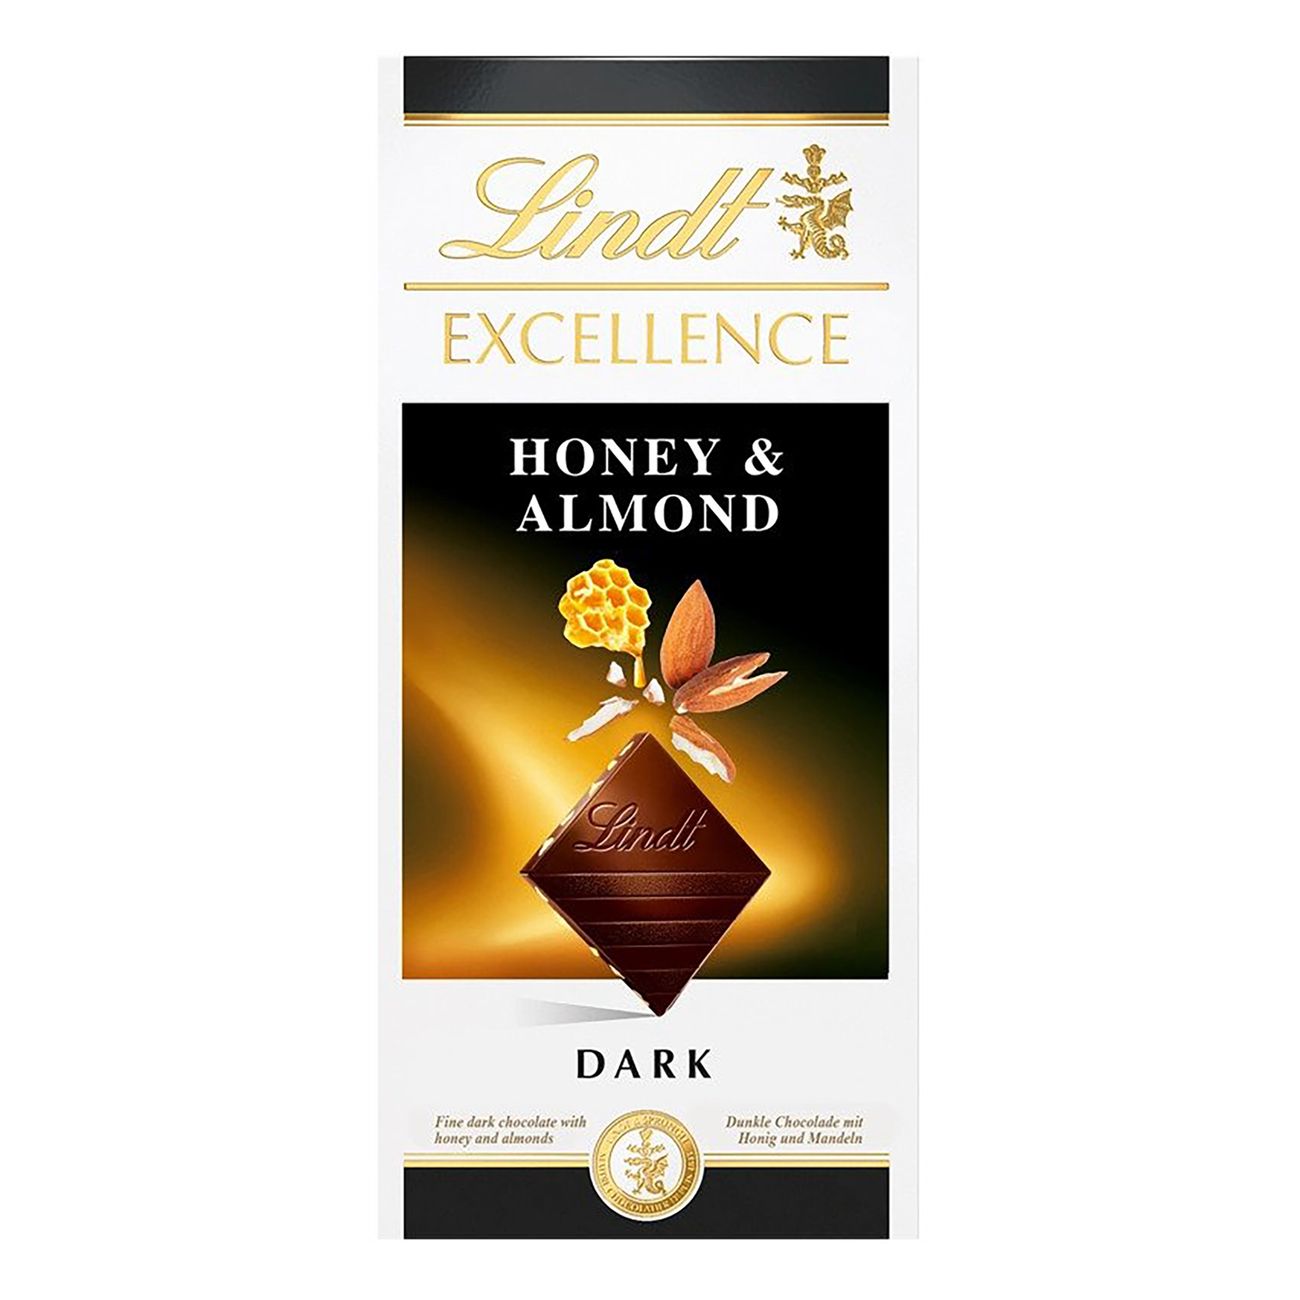 lindt-excellence-honey-almond-86191-2